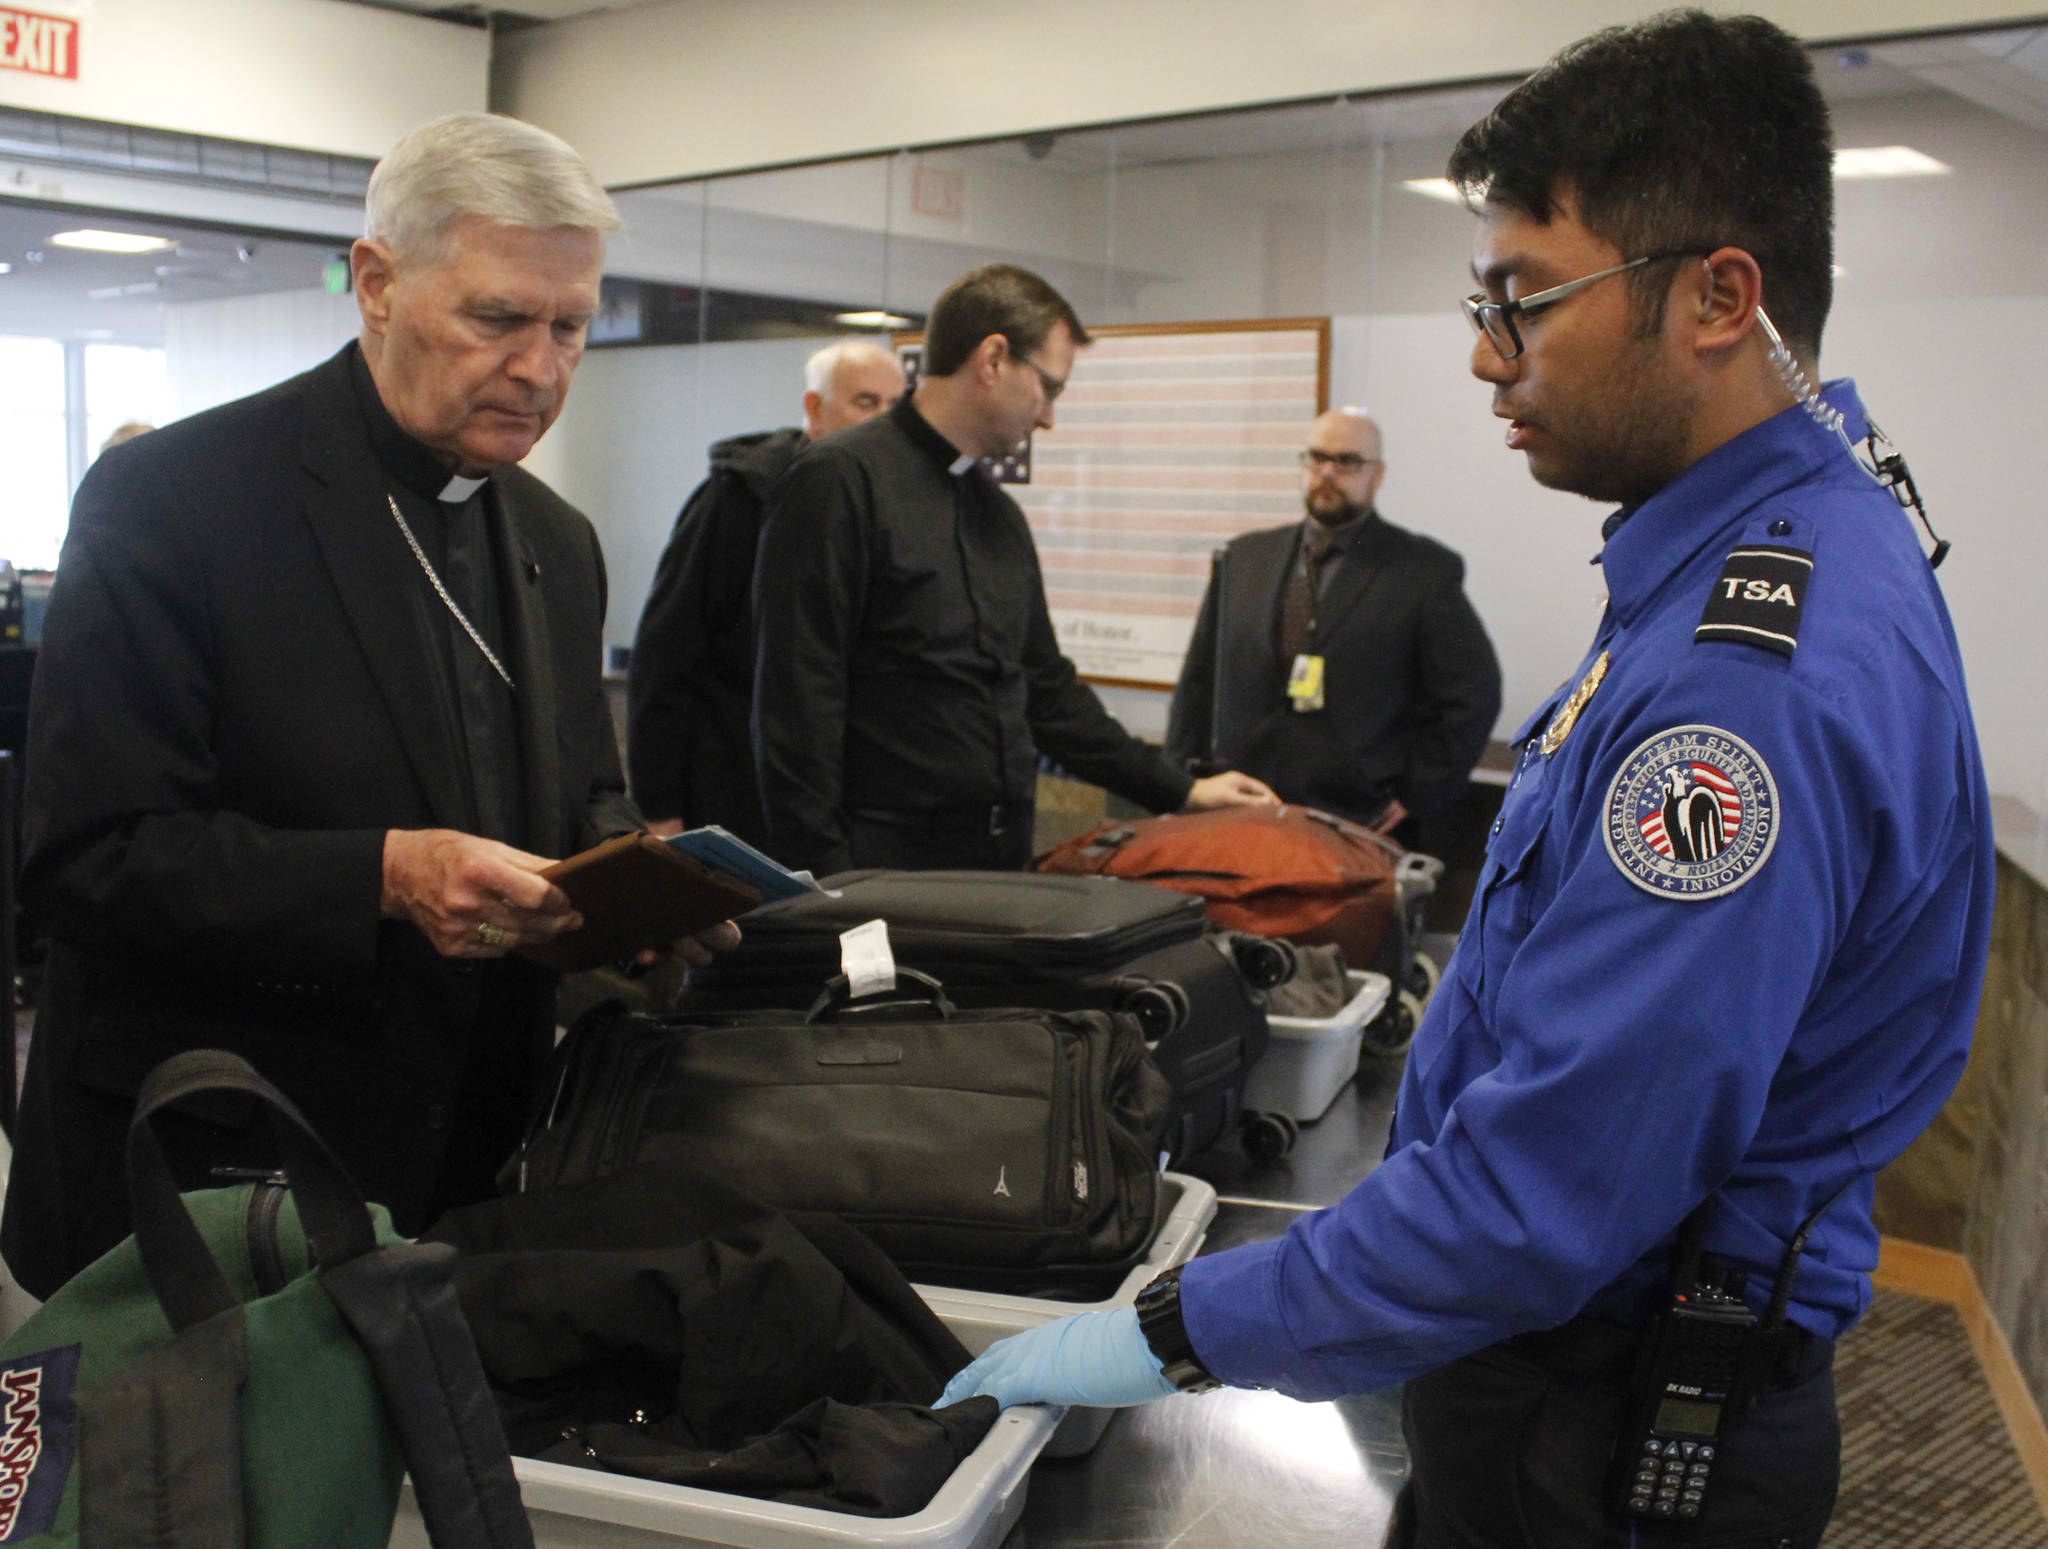 Transportation Security Officer Renier Cava gives instructions to Father Roger Schwietz on Wednesday, Oct. 11 at the Juneau International Airport. A new policy from the Transportation Security Administration requires passengers to remove all electronic items larger than their cell phones and put them through the scanner. (Alex McCarthy | Juneau Empire)